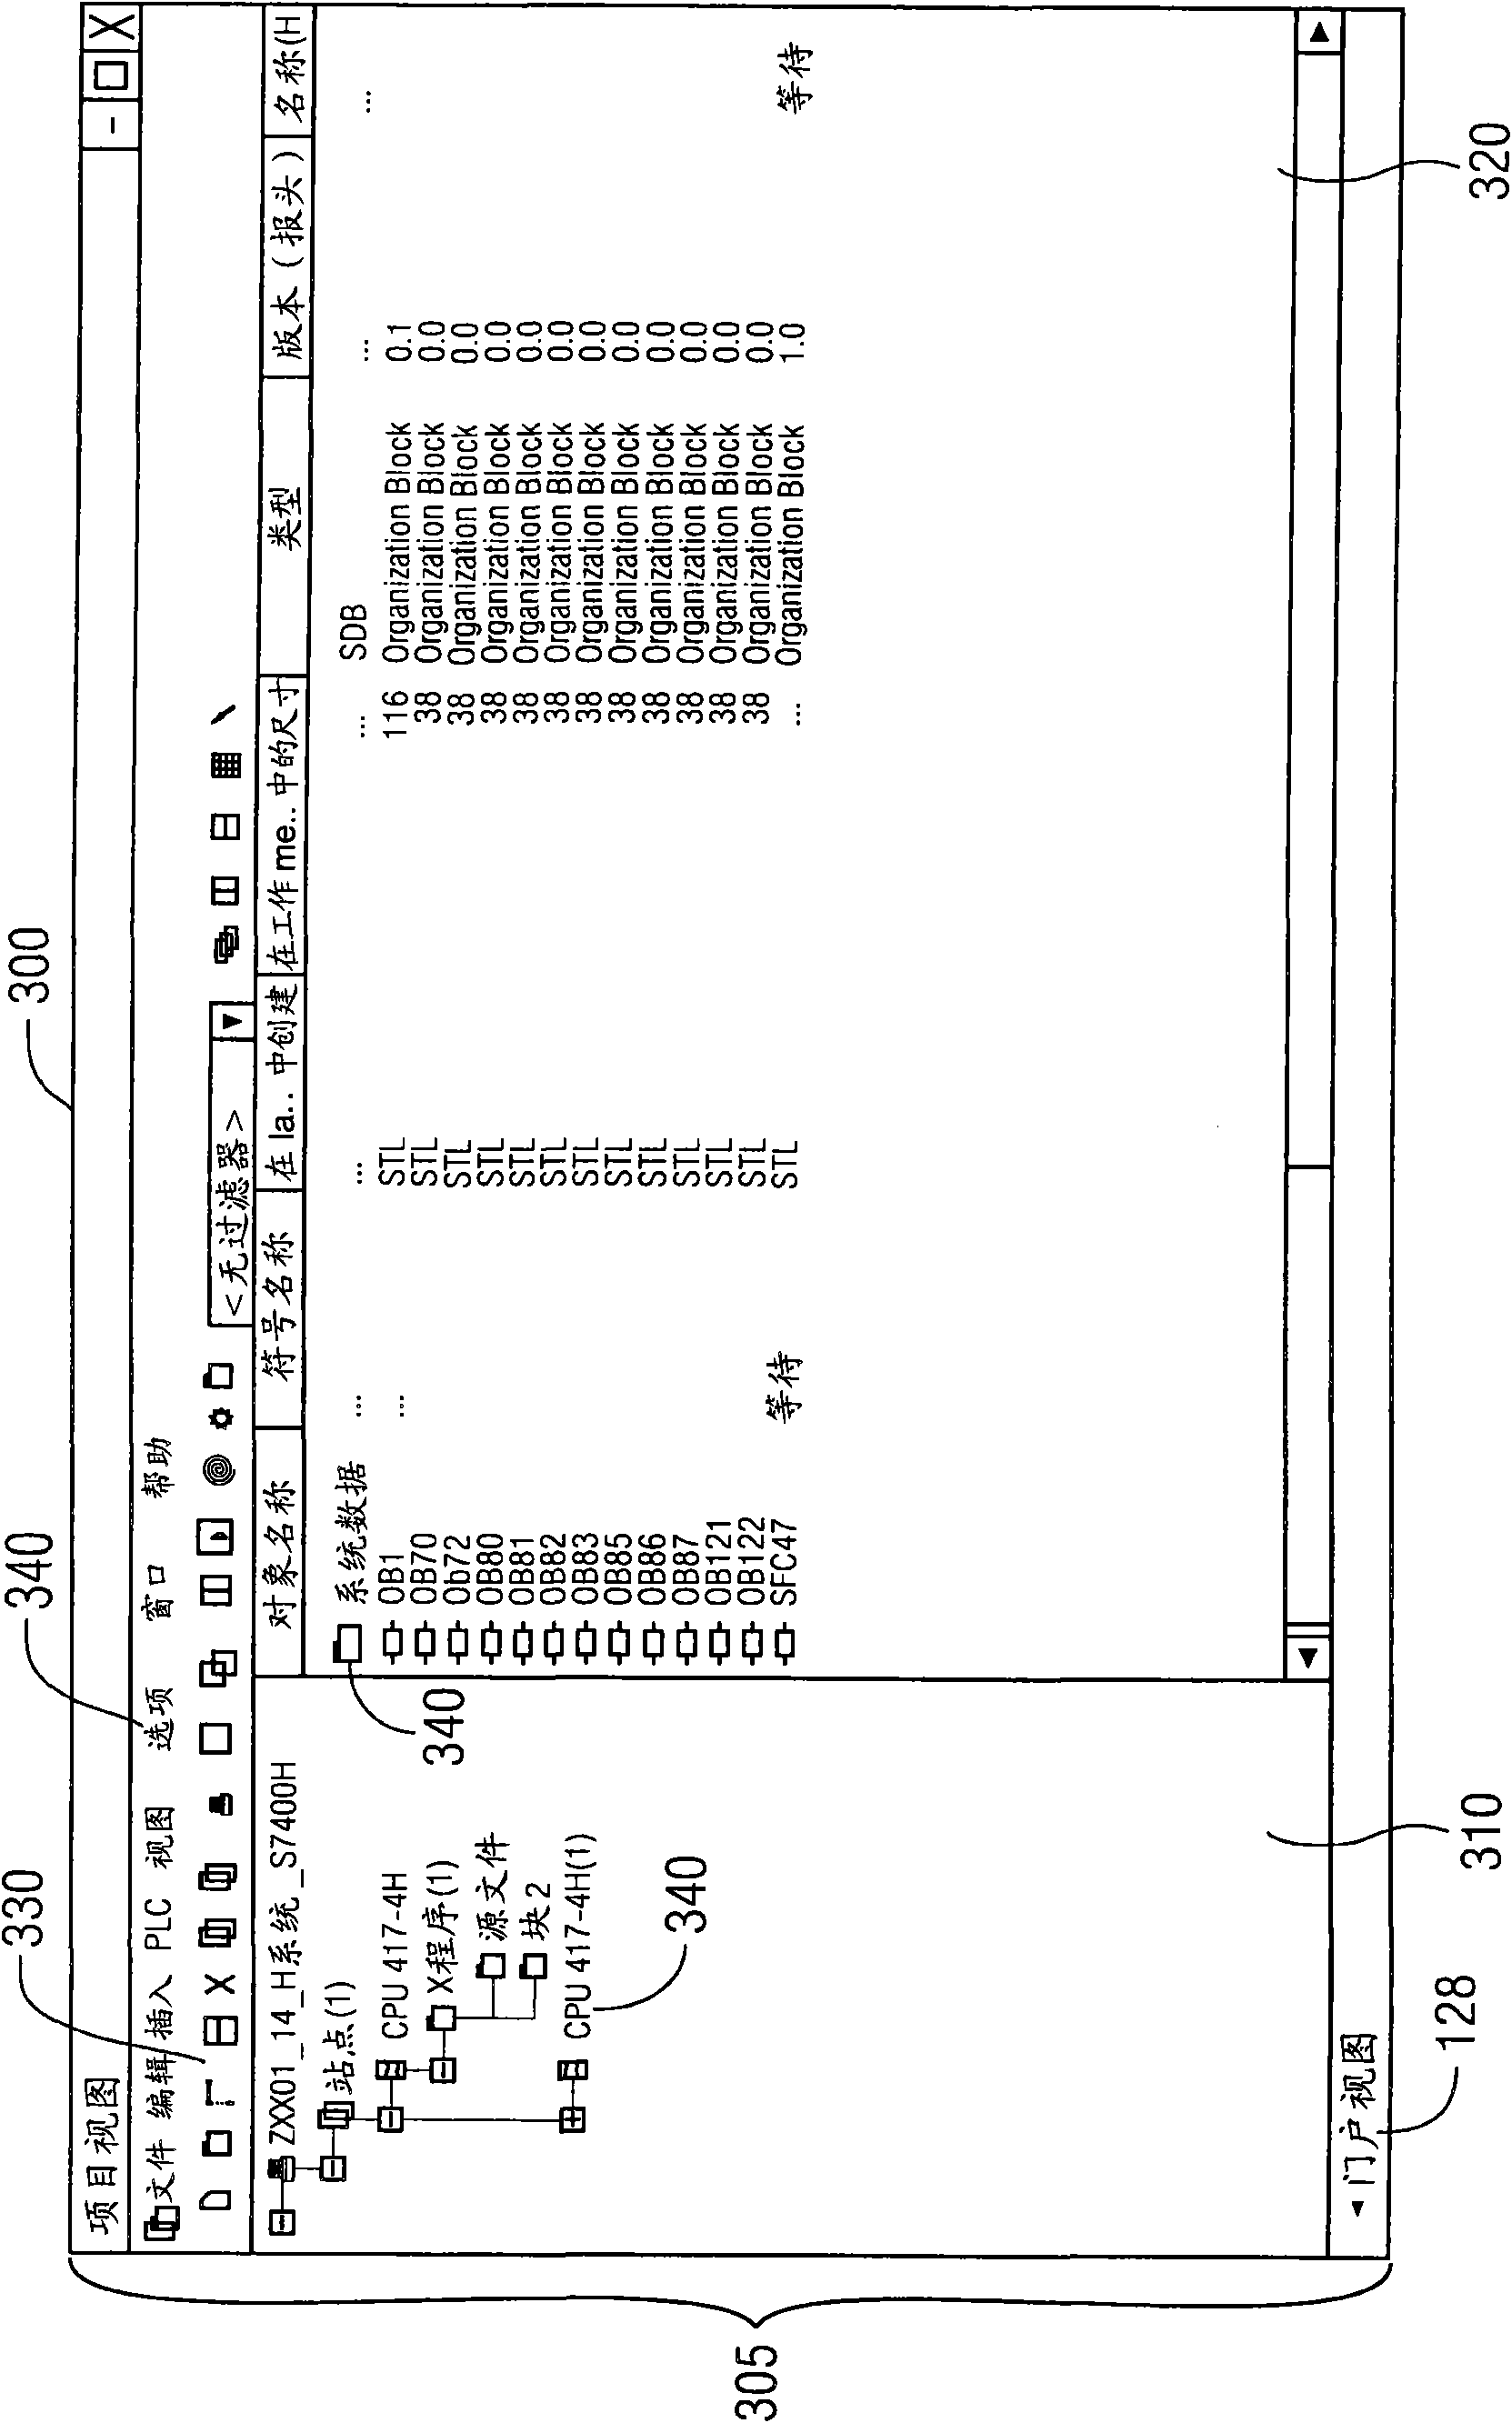 User interface and a method thereof